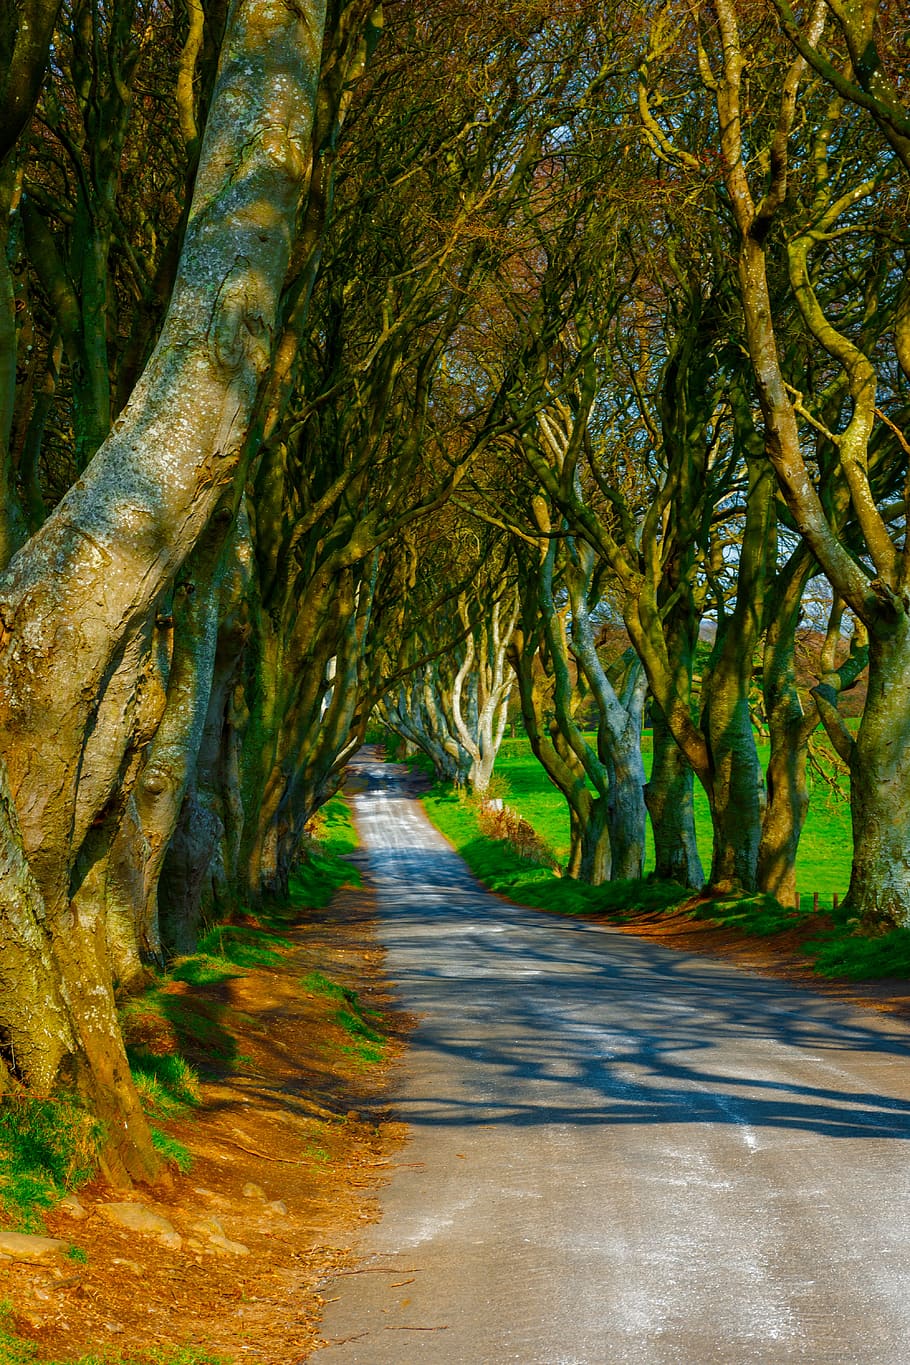 trees, dark hedges, ireland, road, mysterious, pathway, mystical, old, fantasy, game of thrones